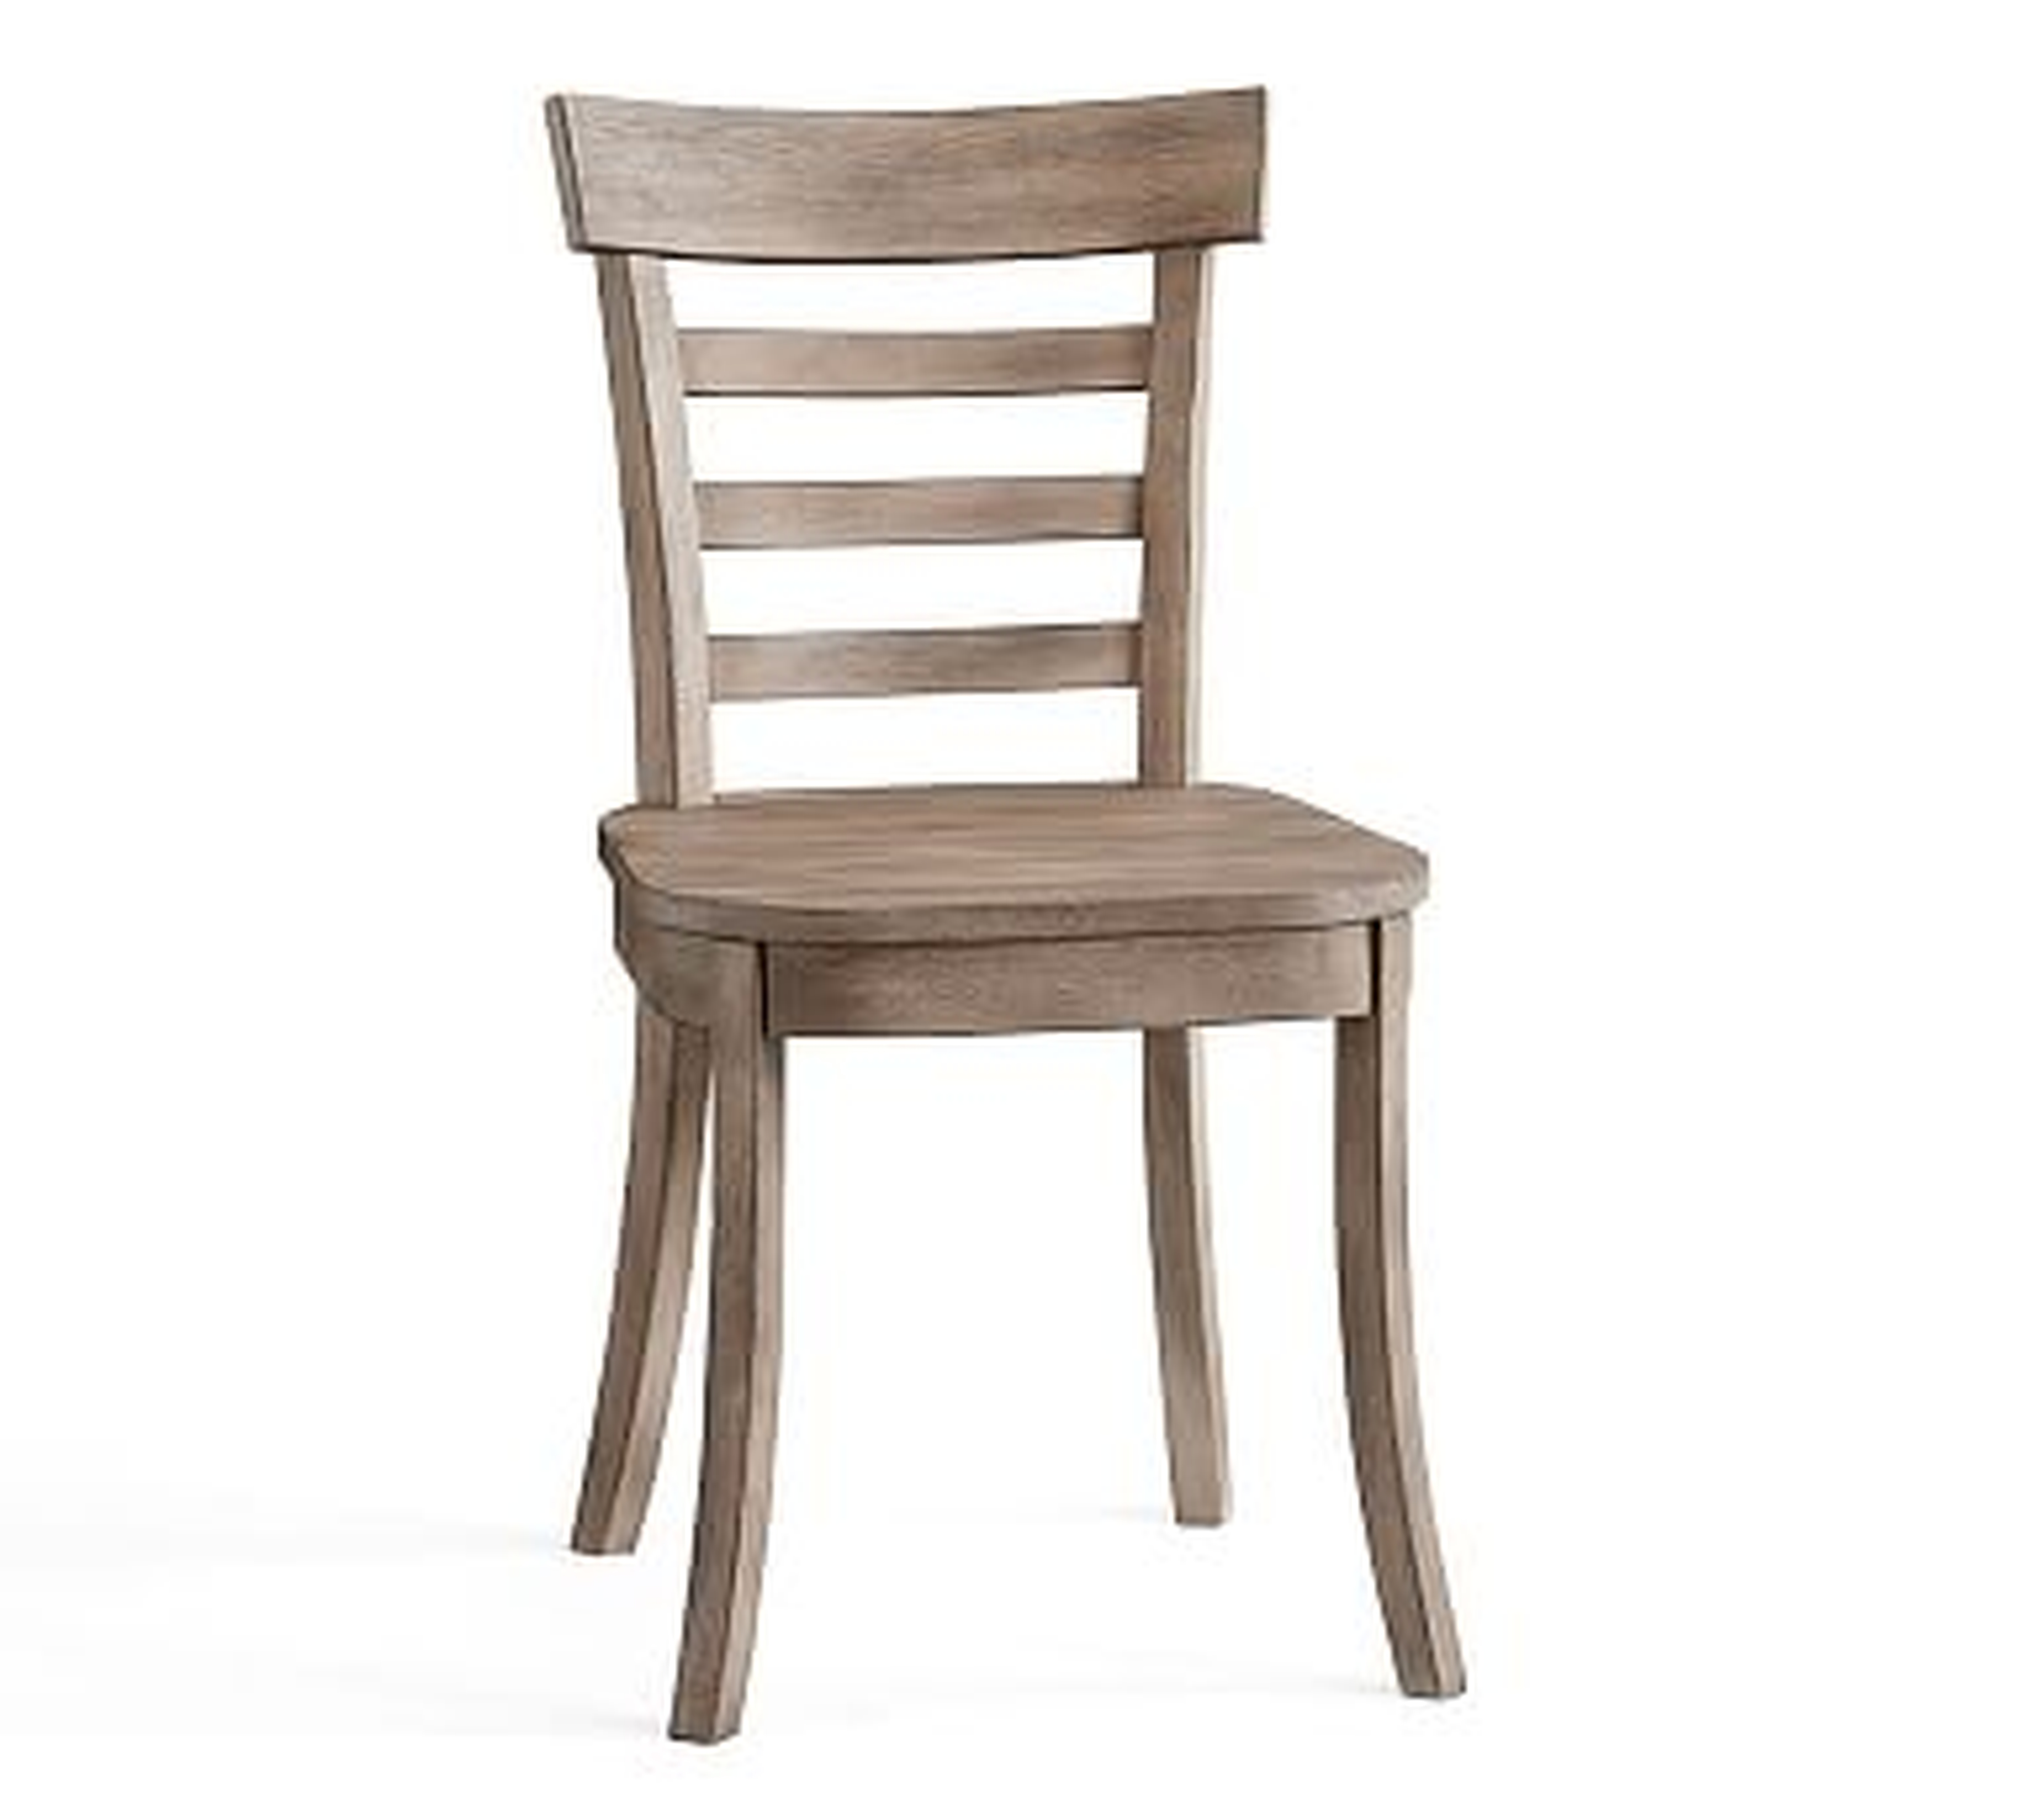 Liam Dining Side Chair, Weathered Gray - Pottery Barn